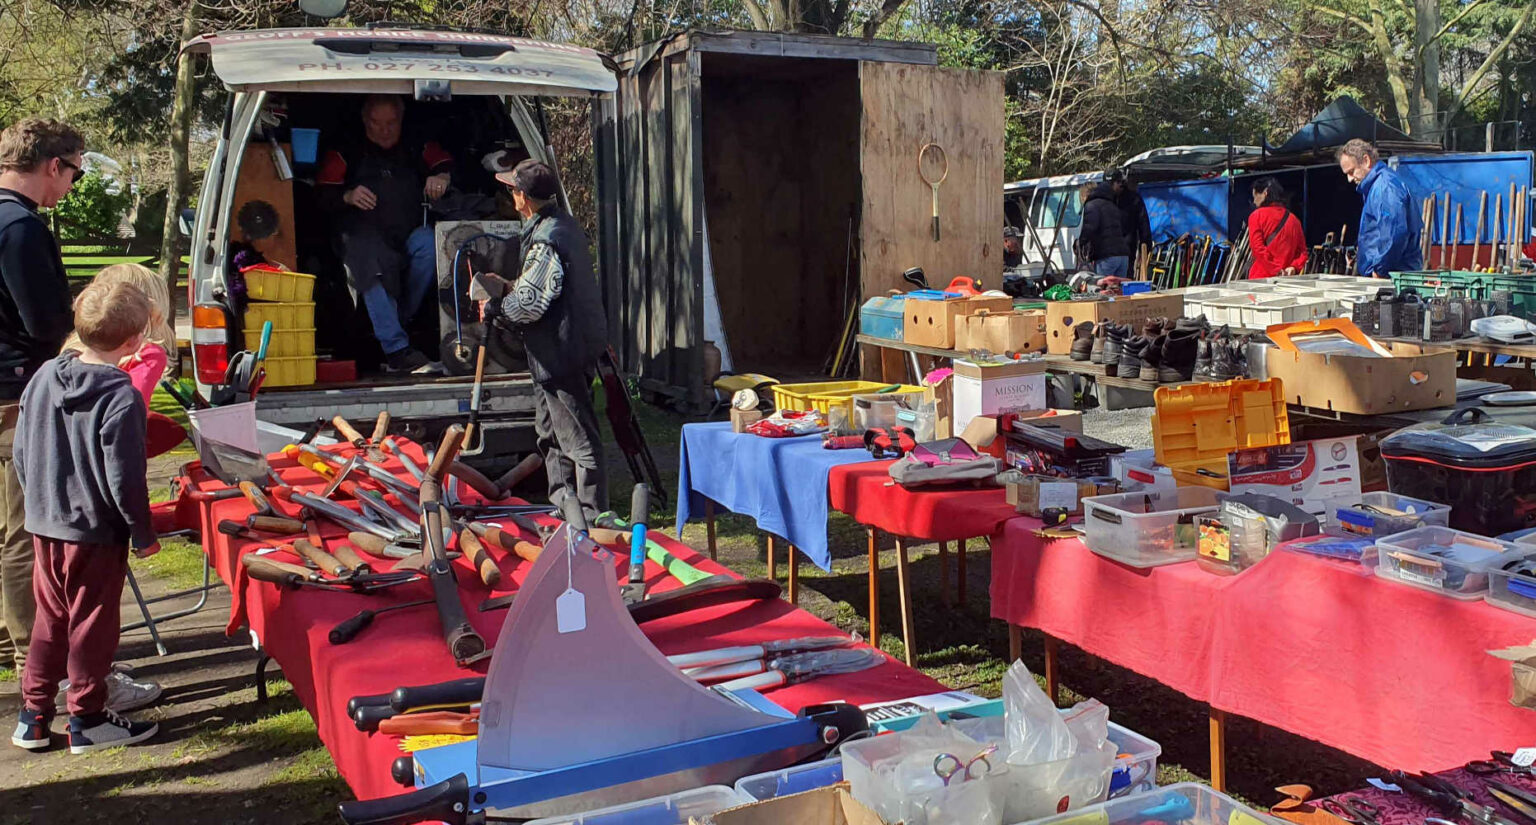 Riccarton Market car boot sales are alive and well, Christchurch Canterbury NZ